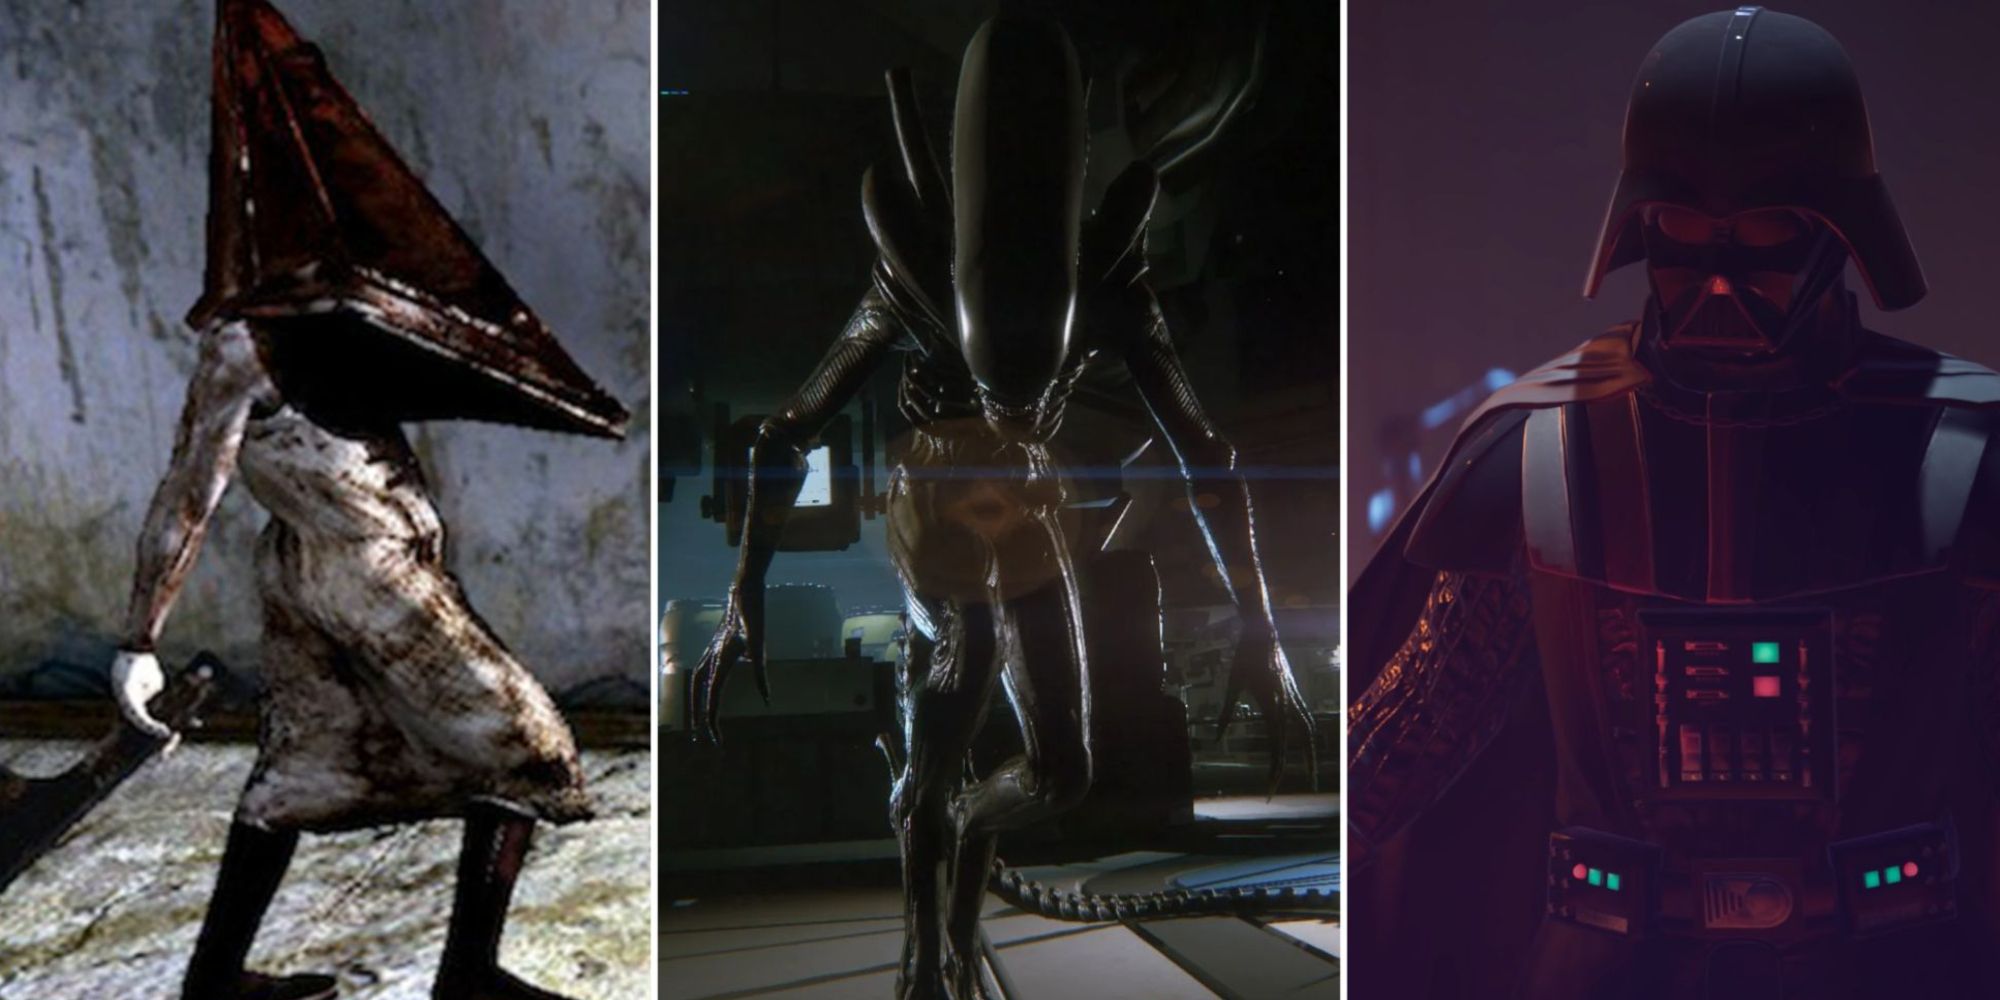 Collage of the Best Unkillable Video Game Enemies, featuring Silent Hill 2, Alien: Isolation, and Star Wars Jedi: Fallen Order